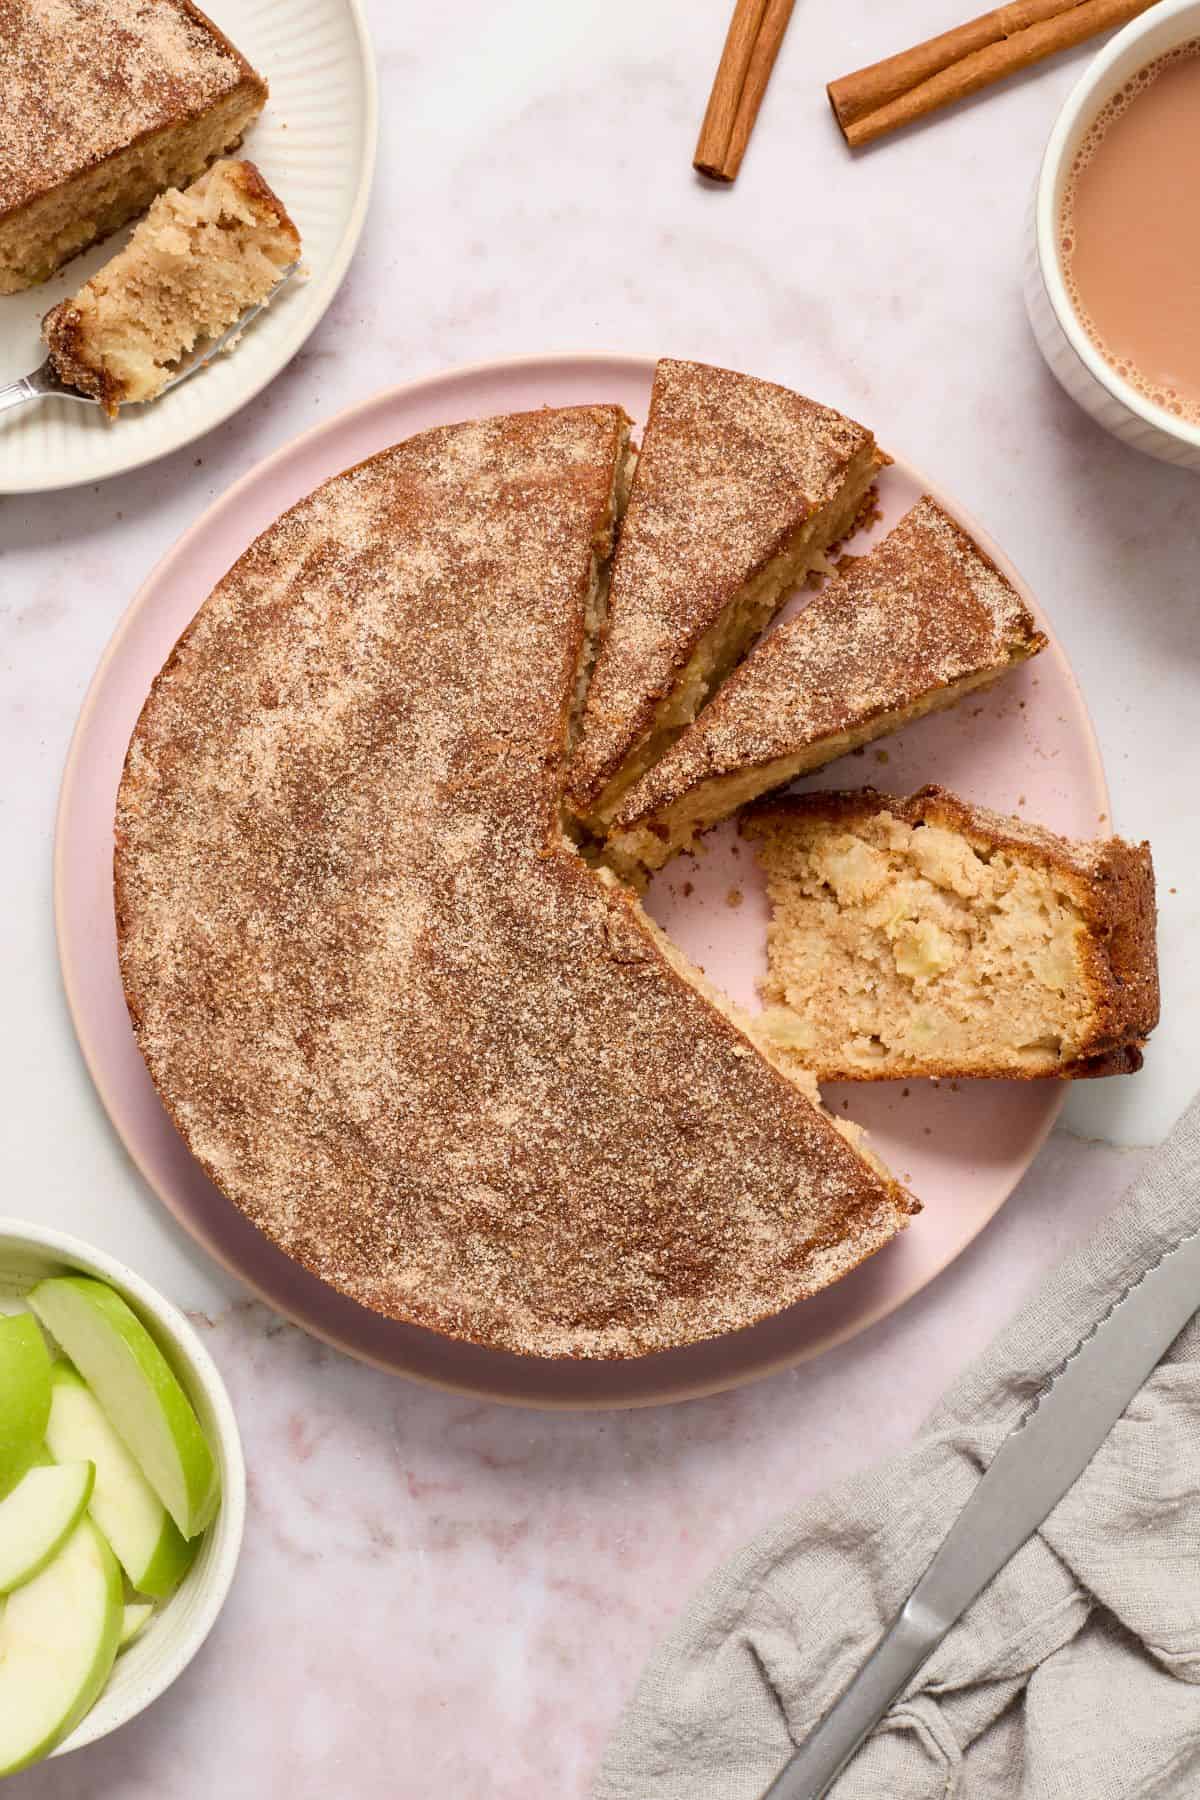 Apple Tea Cake, with three slices cut, and one slice on the side to show the texture of the cake.